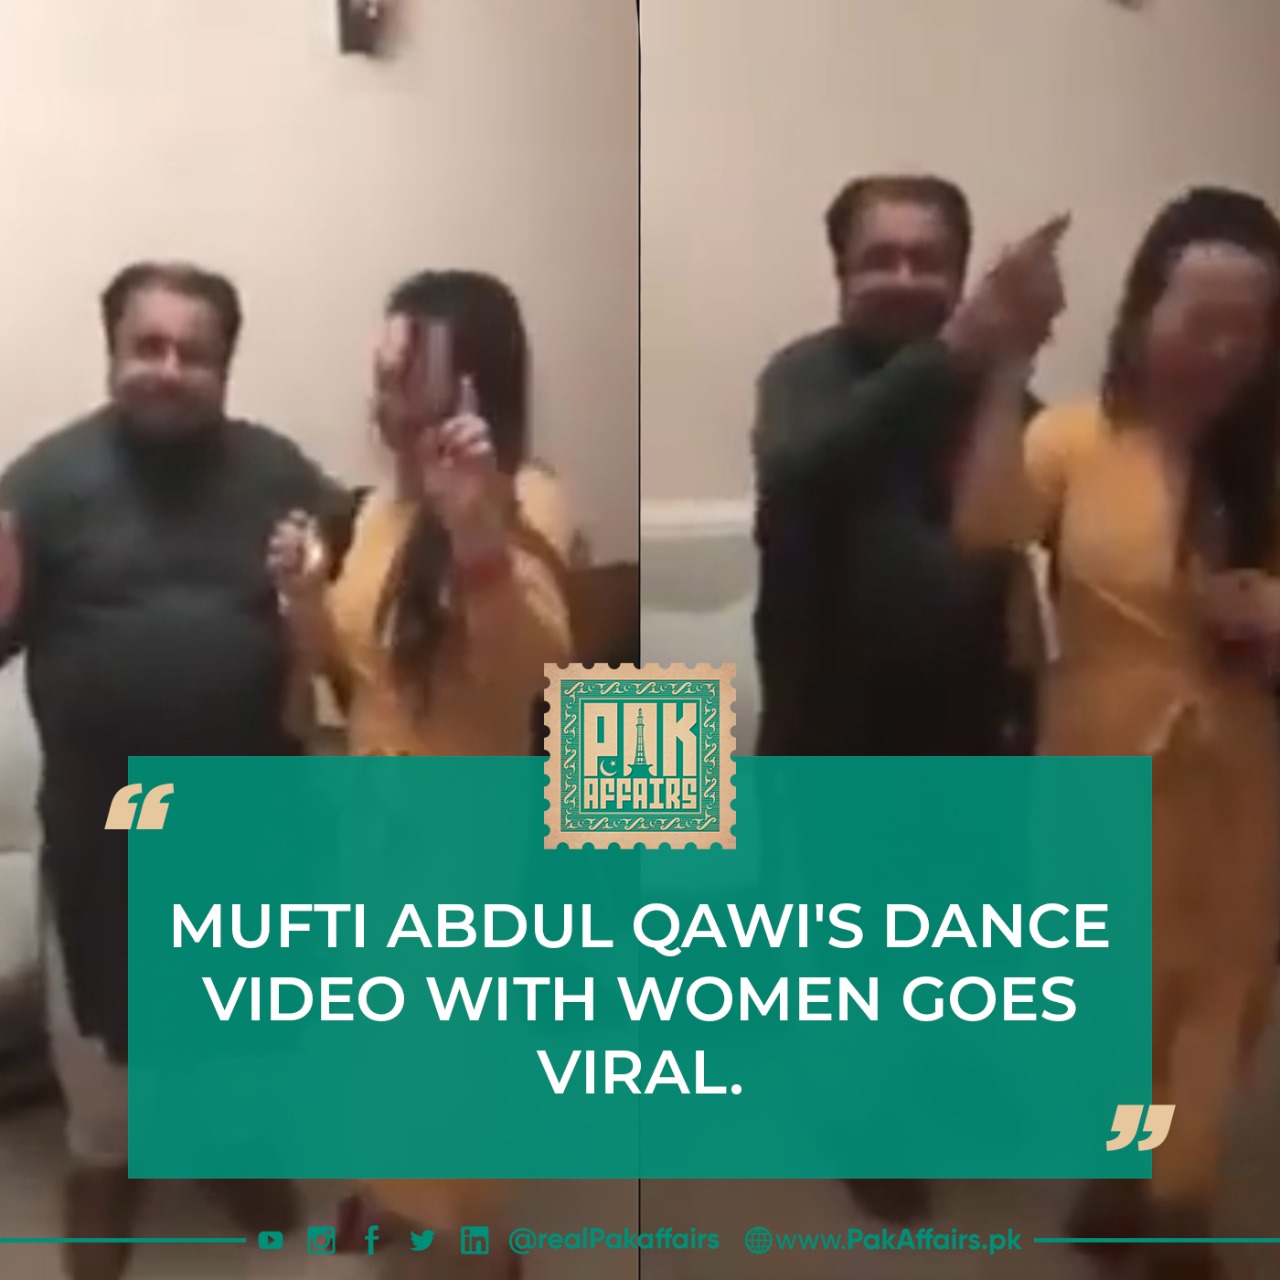 Mufti Abdul Qawi's dance video with women goes viral.